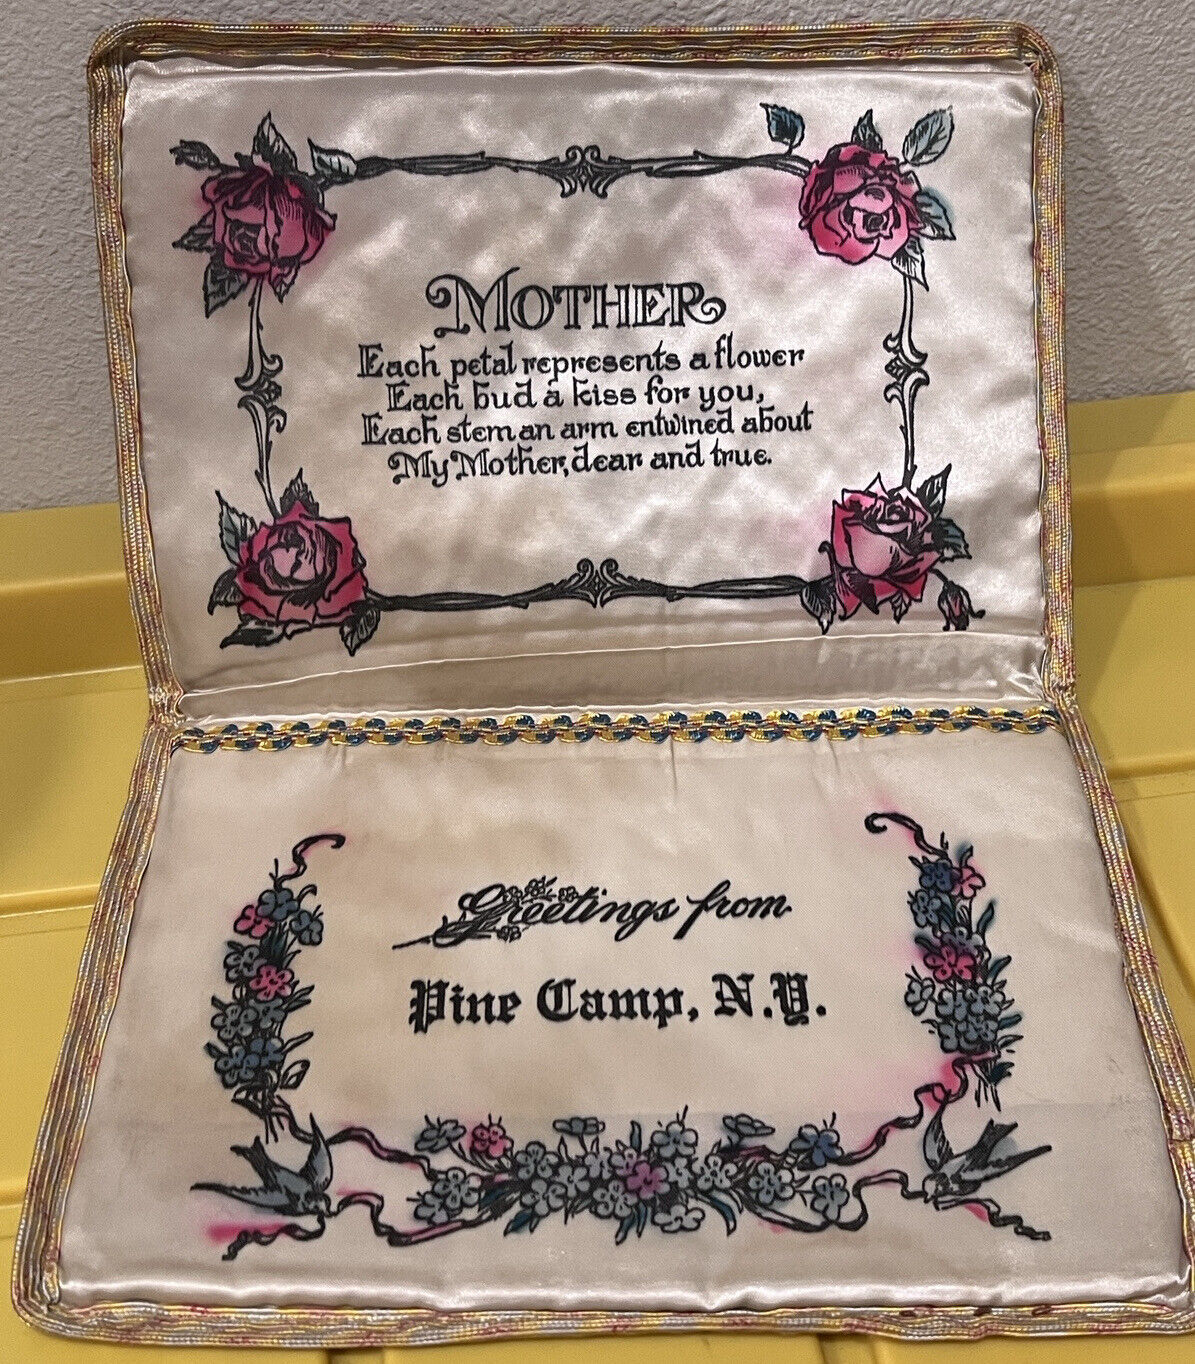 c1940s Greetings From Pine Camp NY New York Silk Satin Bible Cover To Mother WW2